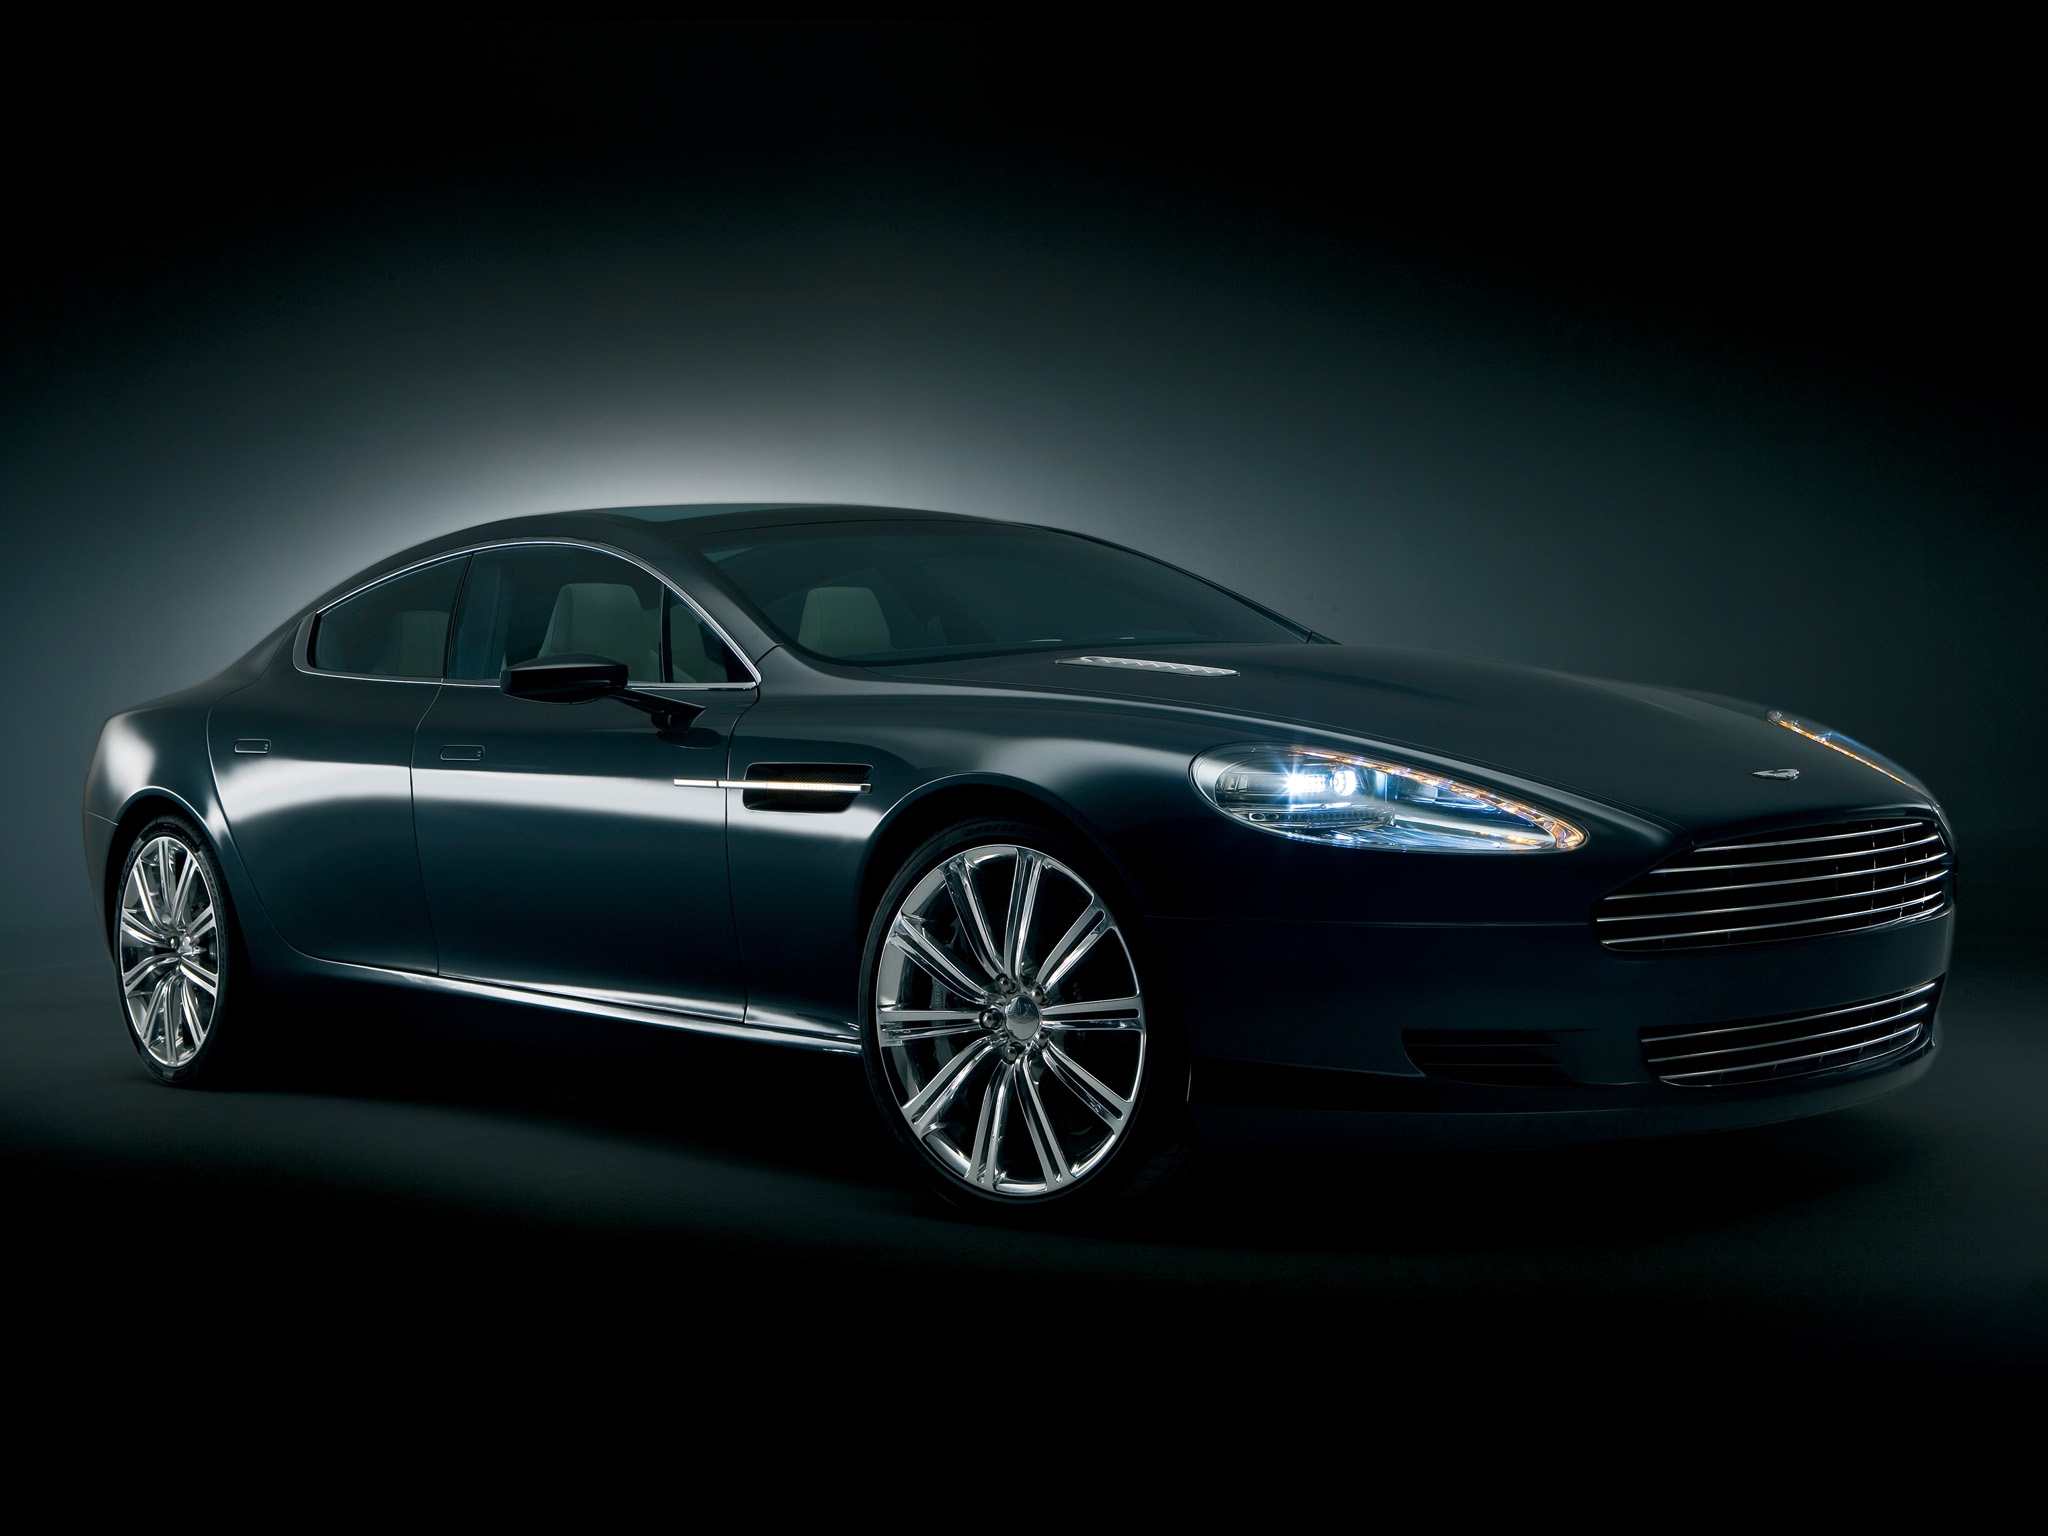 vertical wallpaper cars, black, aston martin, side view, style, concept car, 2006, rapide